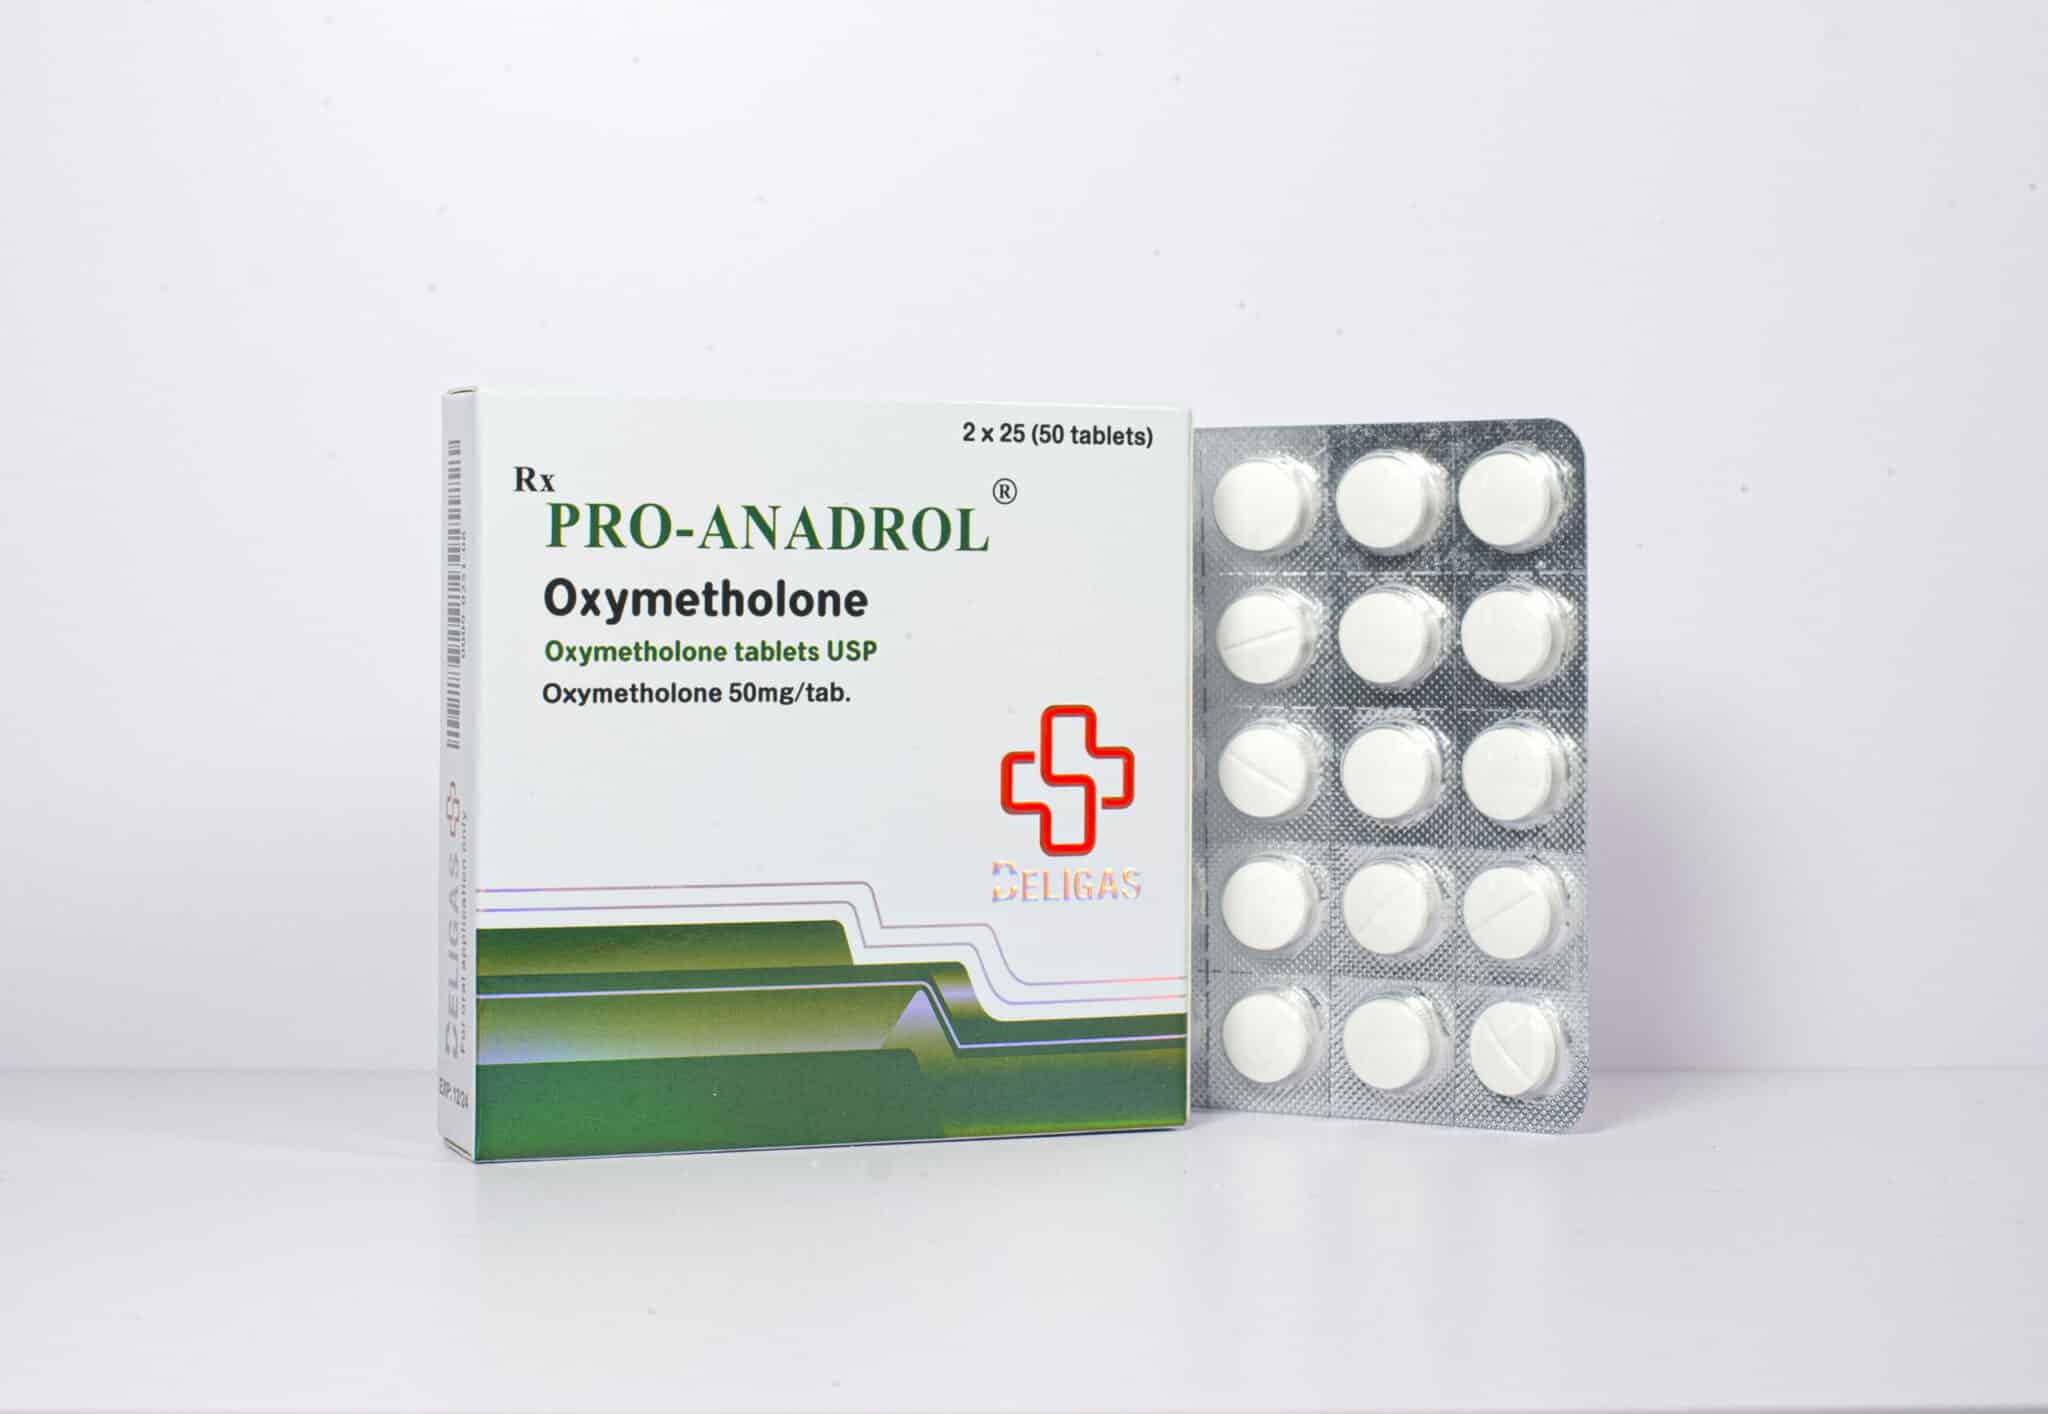 Anadrol For Sale